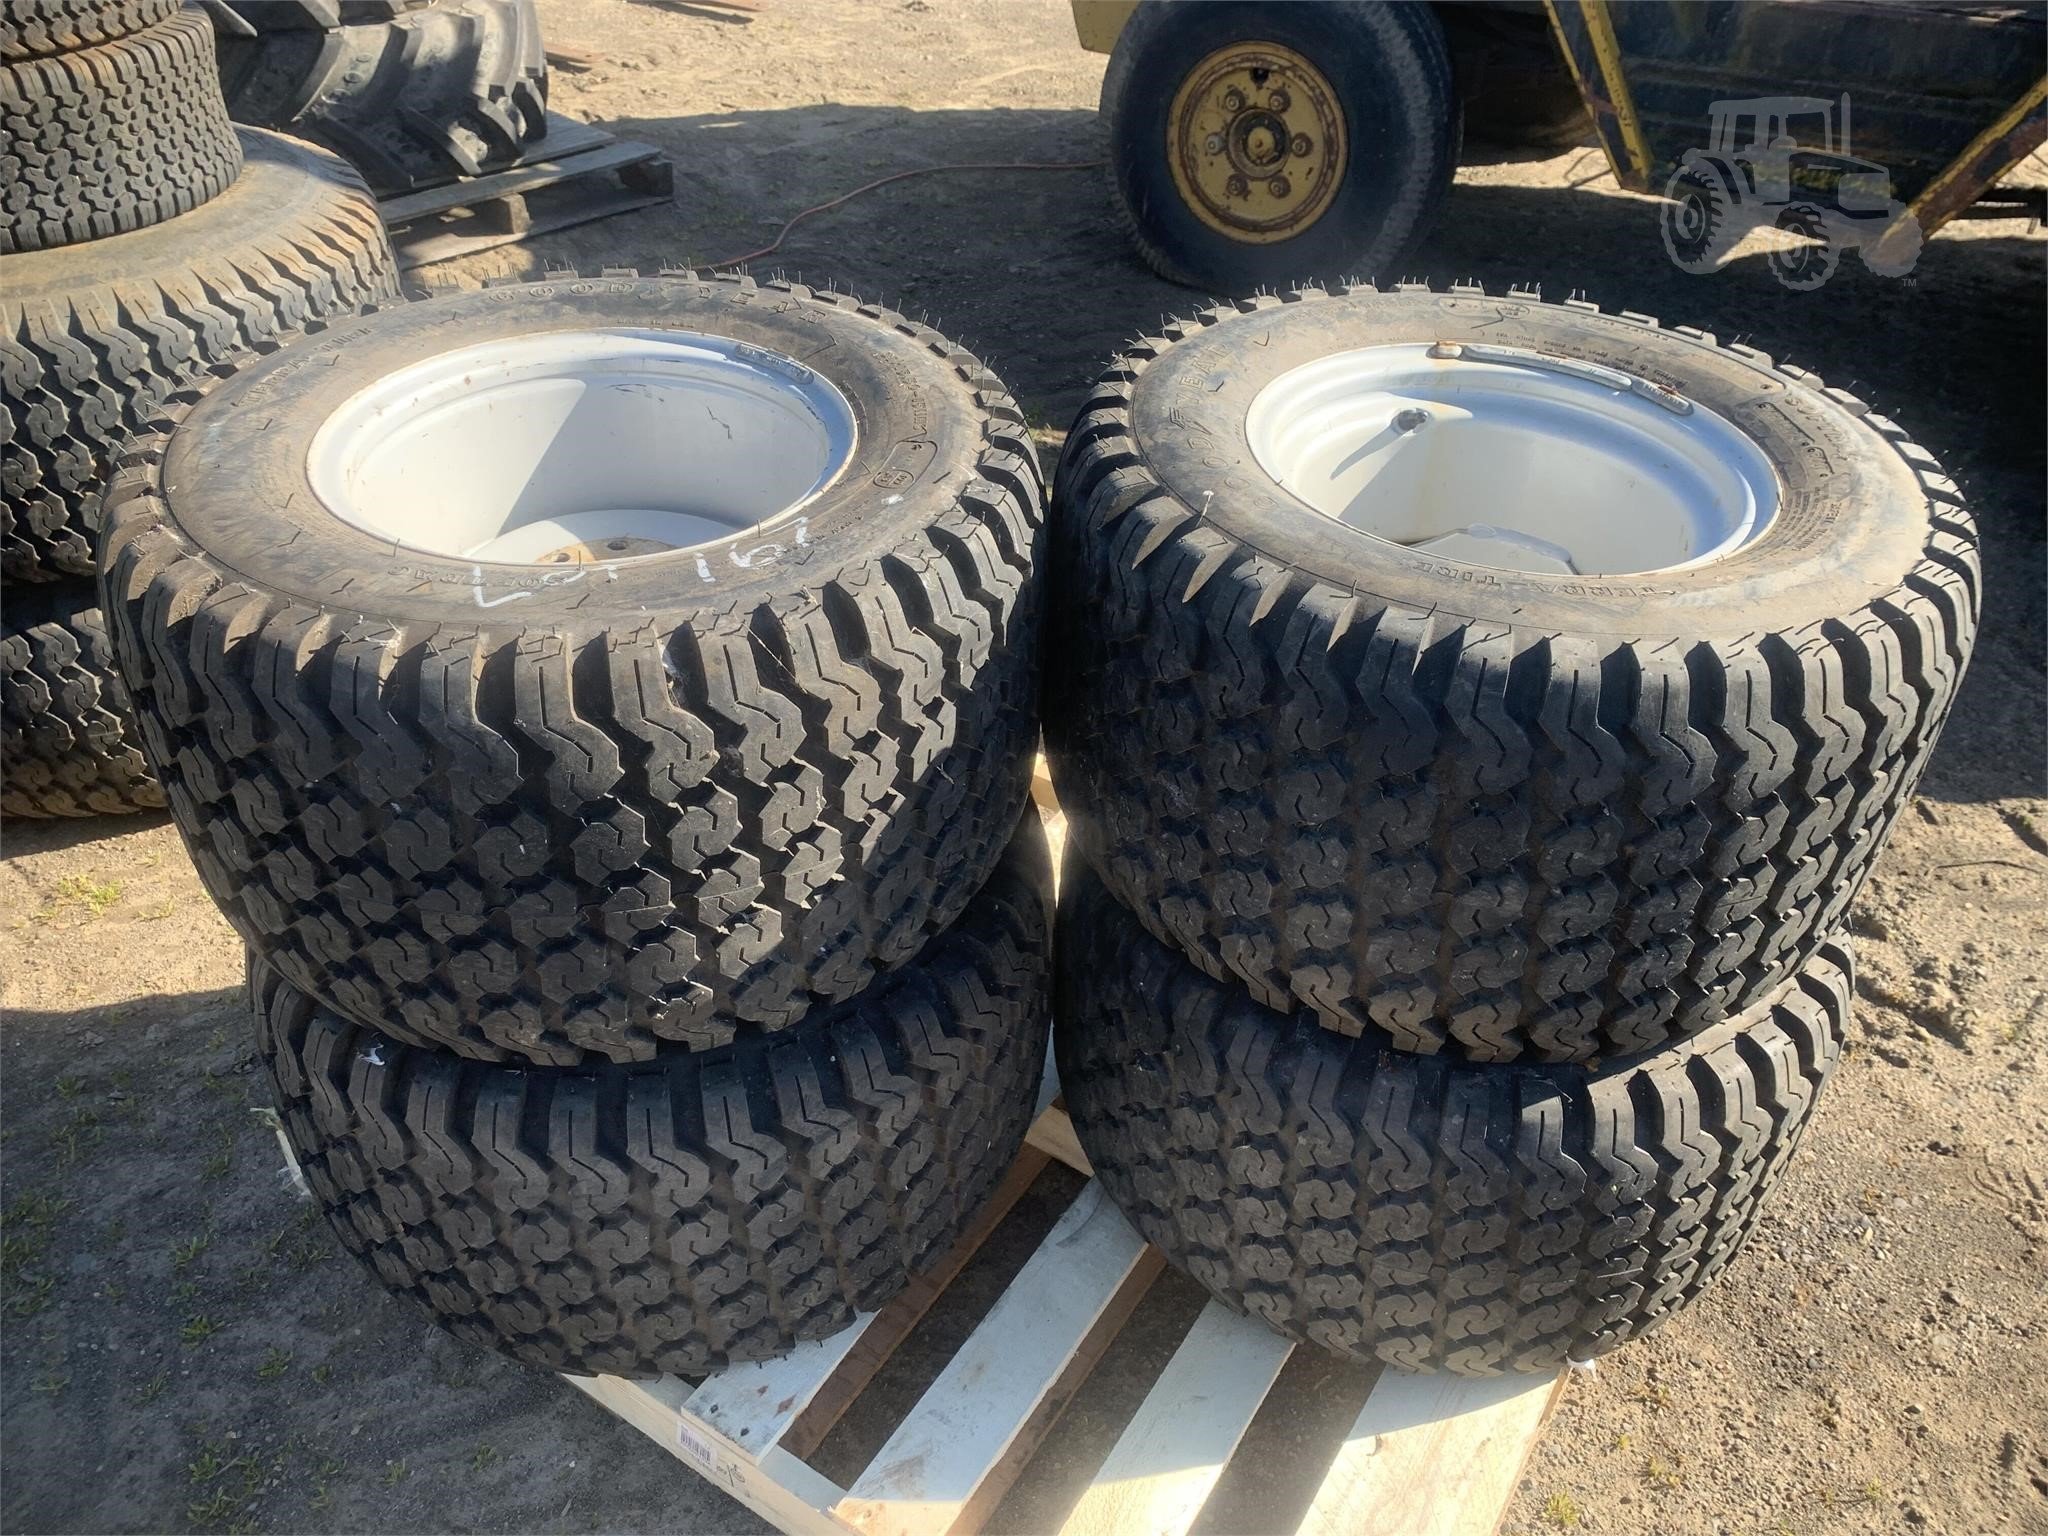 Goodyear 31x15 5 15 Tires And Rims, Toolbox Dresser With Tire Mirror